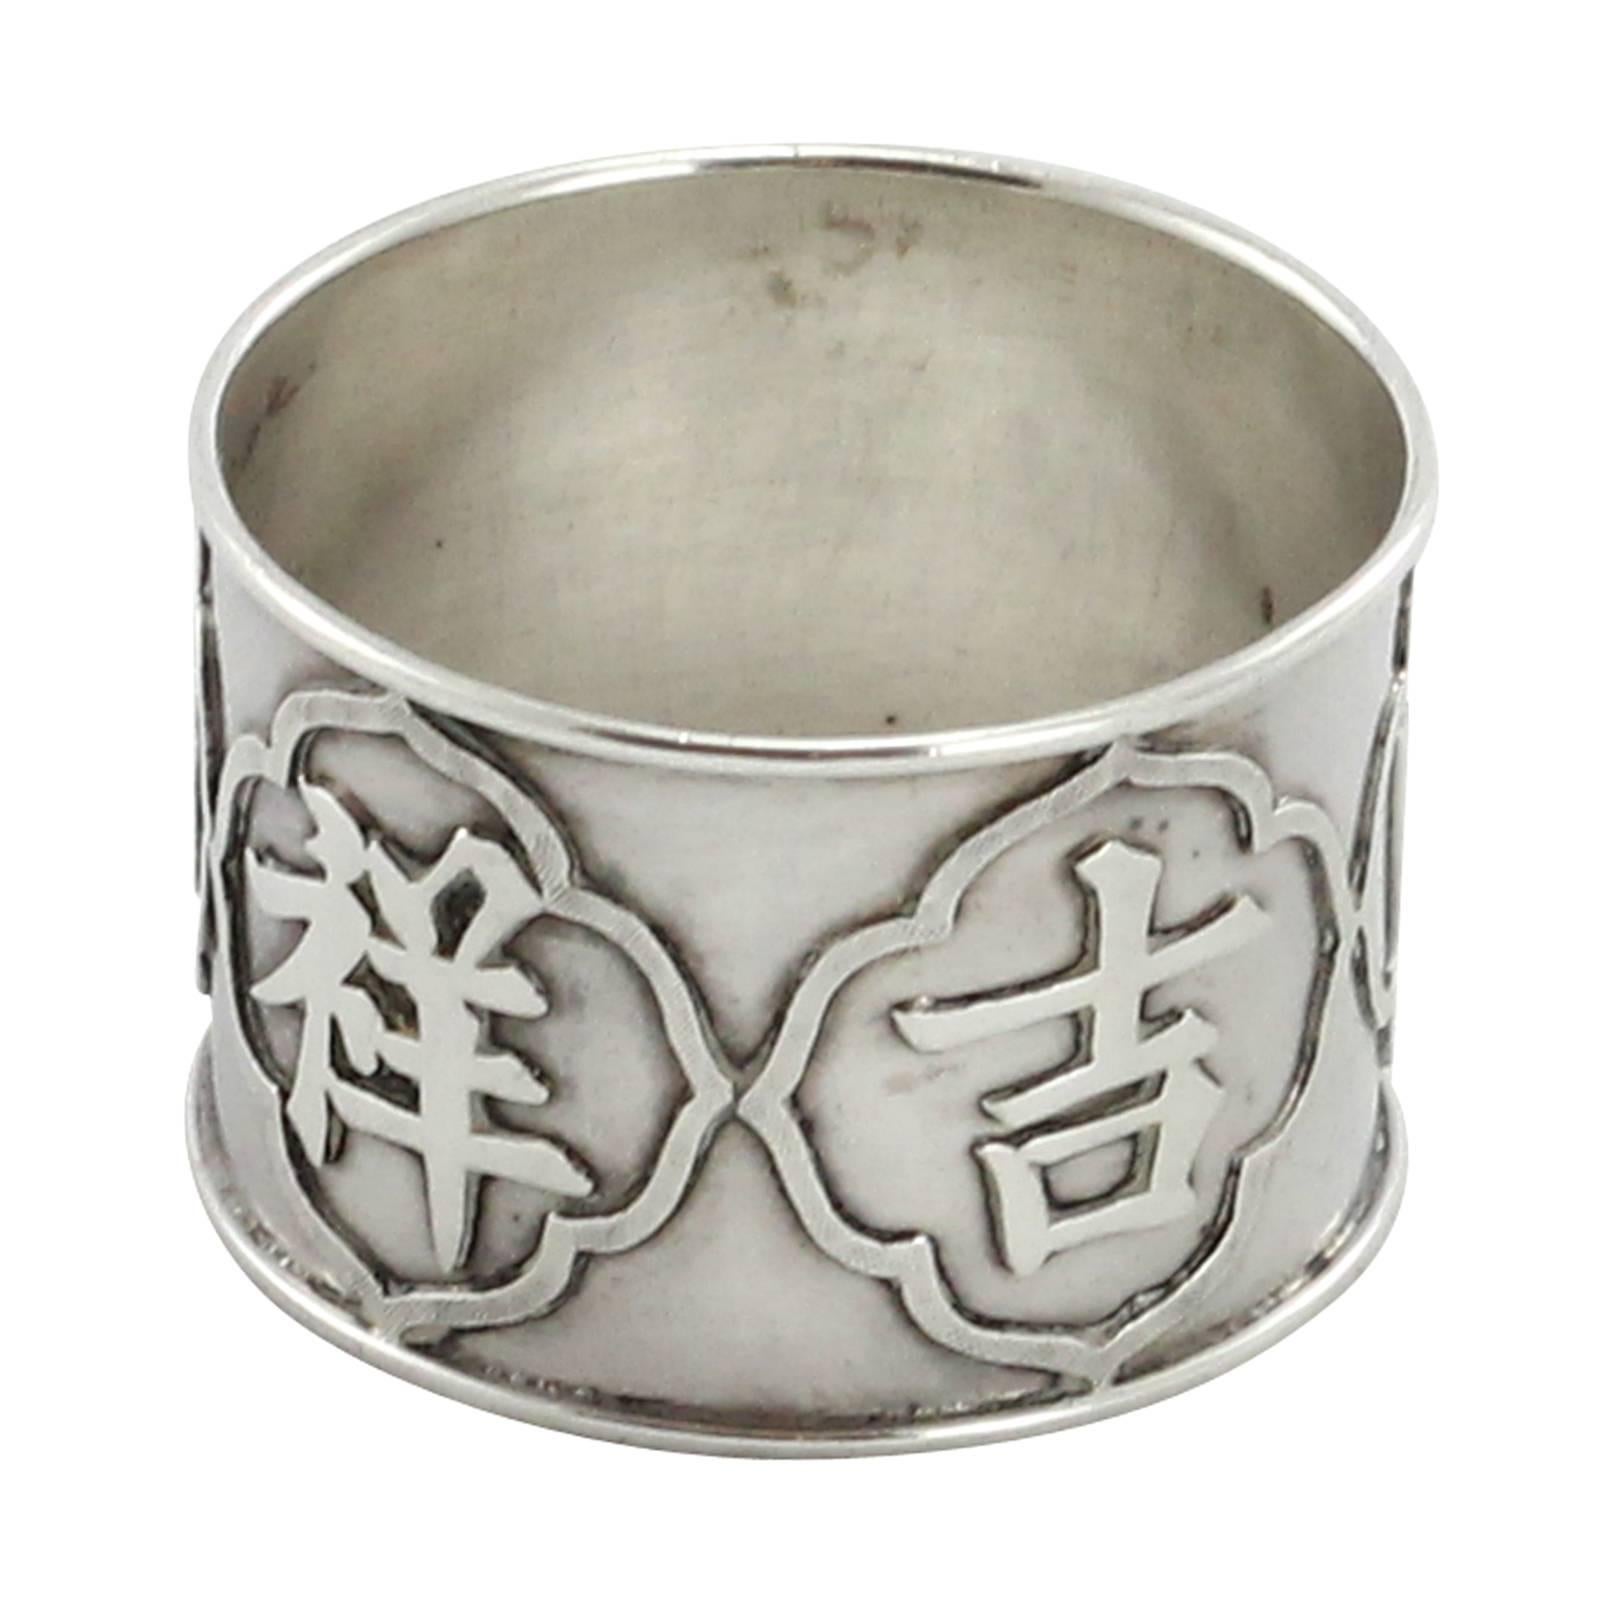 A Chinese Qing Dynasty export silver napkin ring from Shanghai retailer Woshing. The piece features four Chinese characters and a blank shield, assumedly for a monogram.